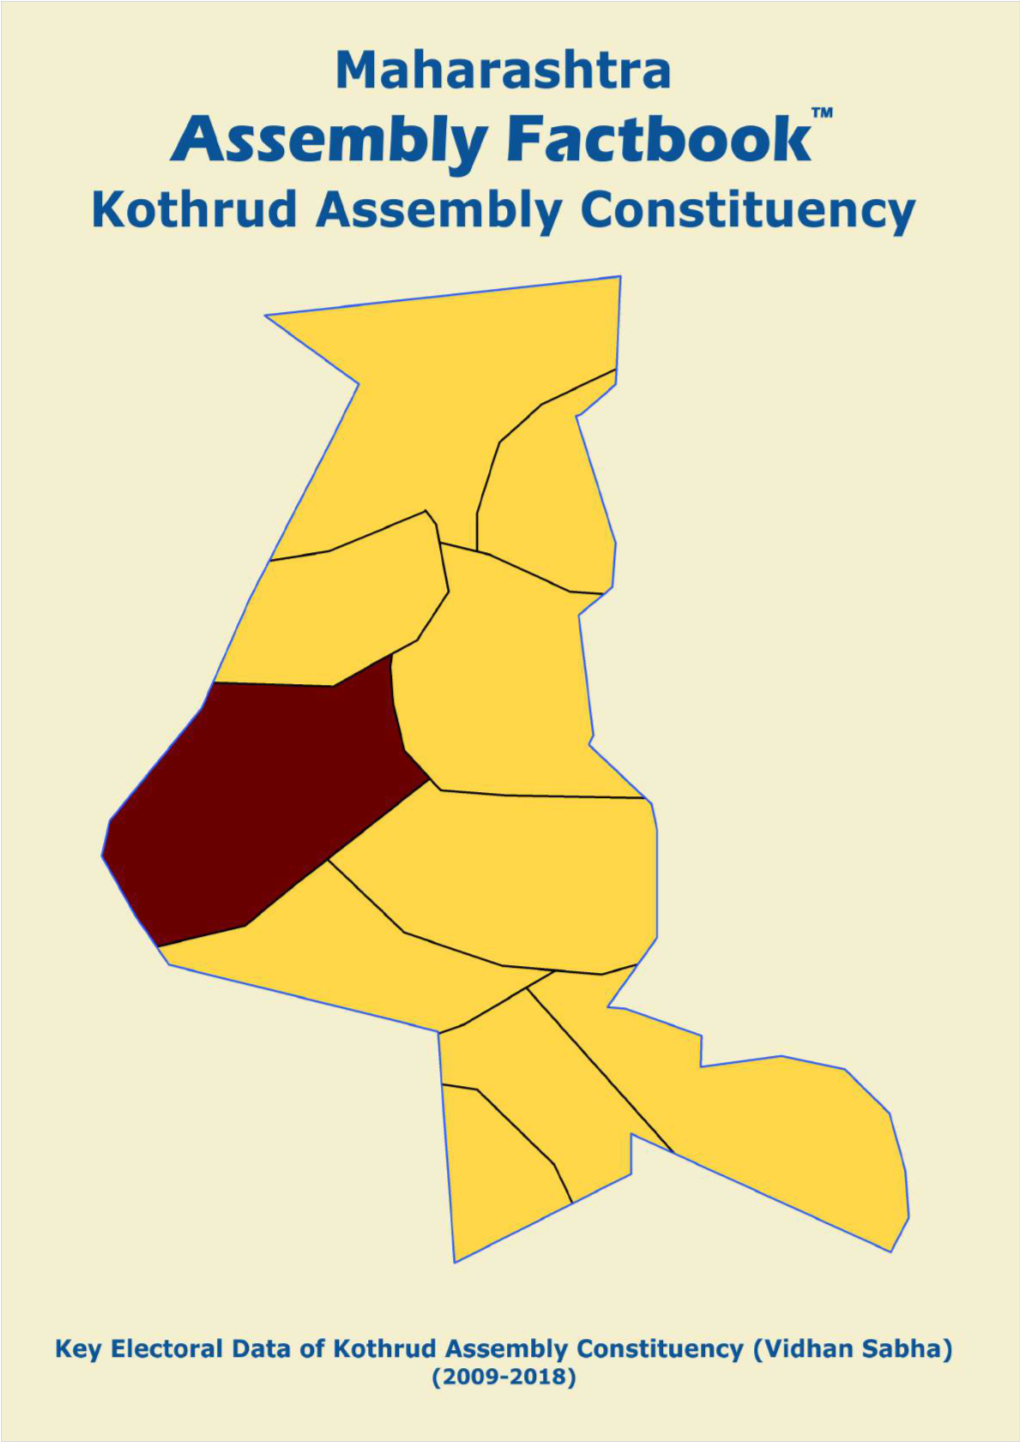 Key Electoral Data of Kothrud Assembly Constituency